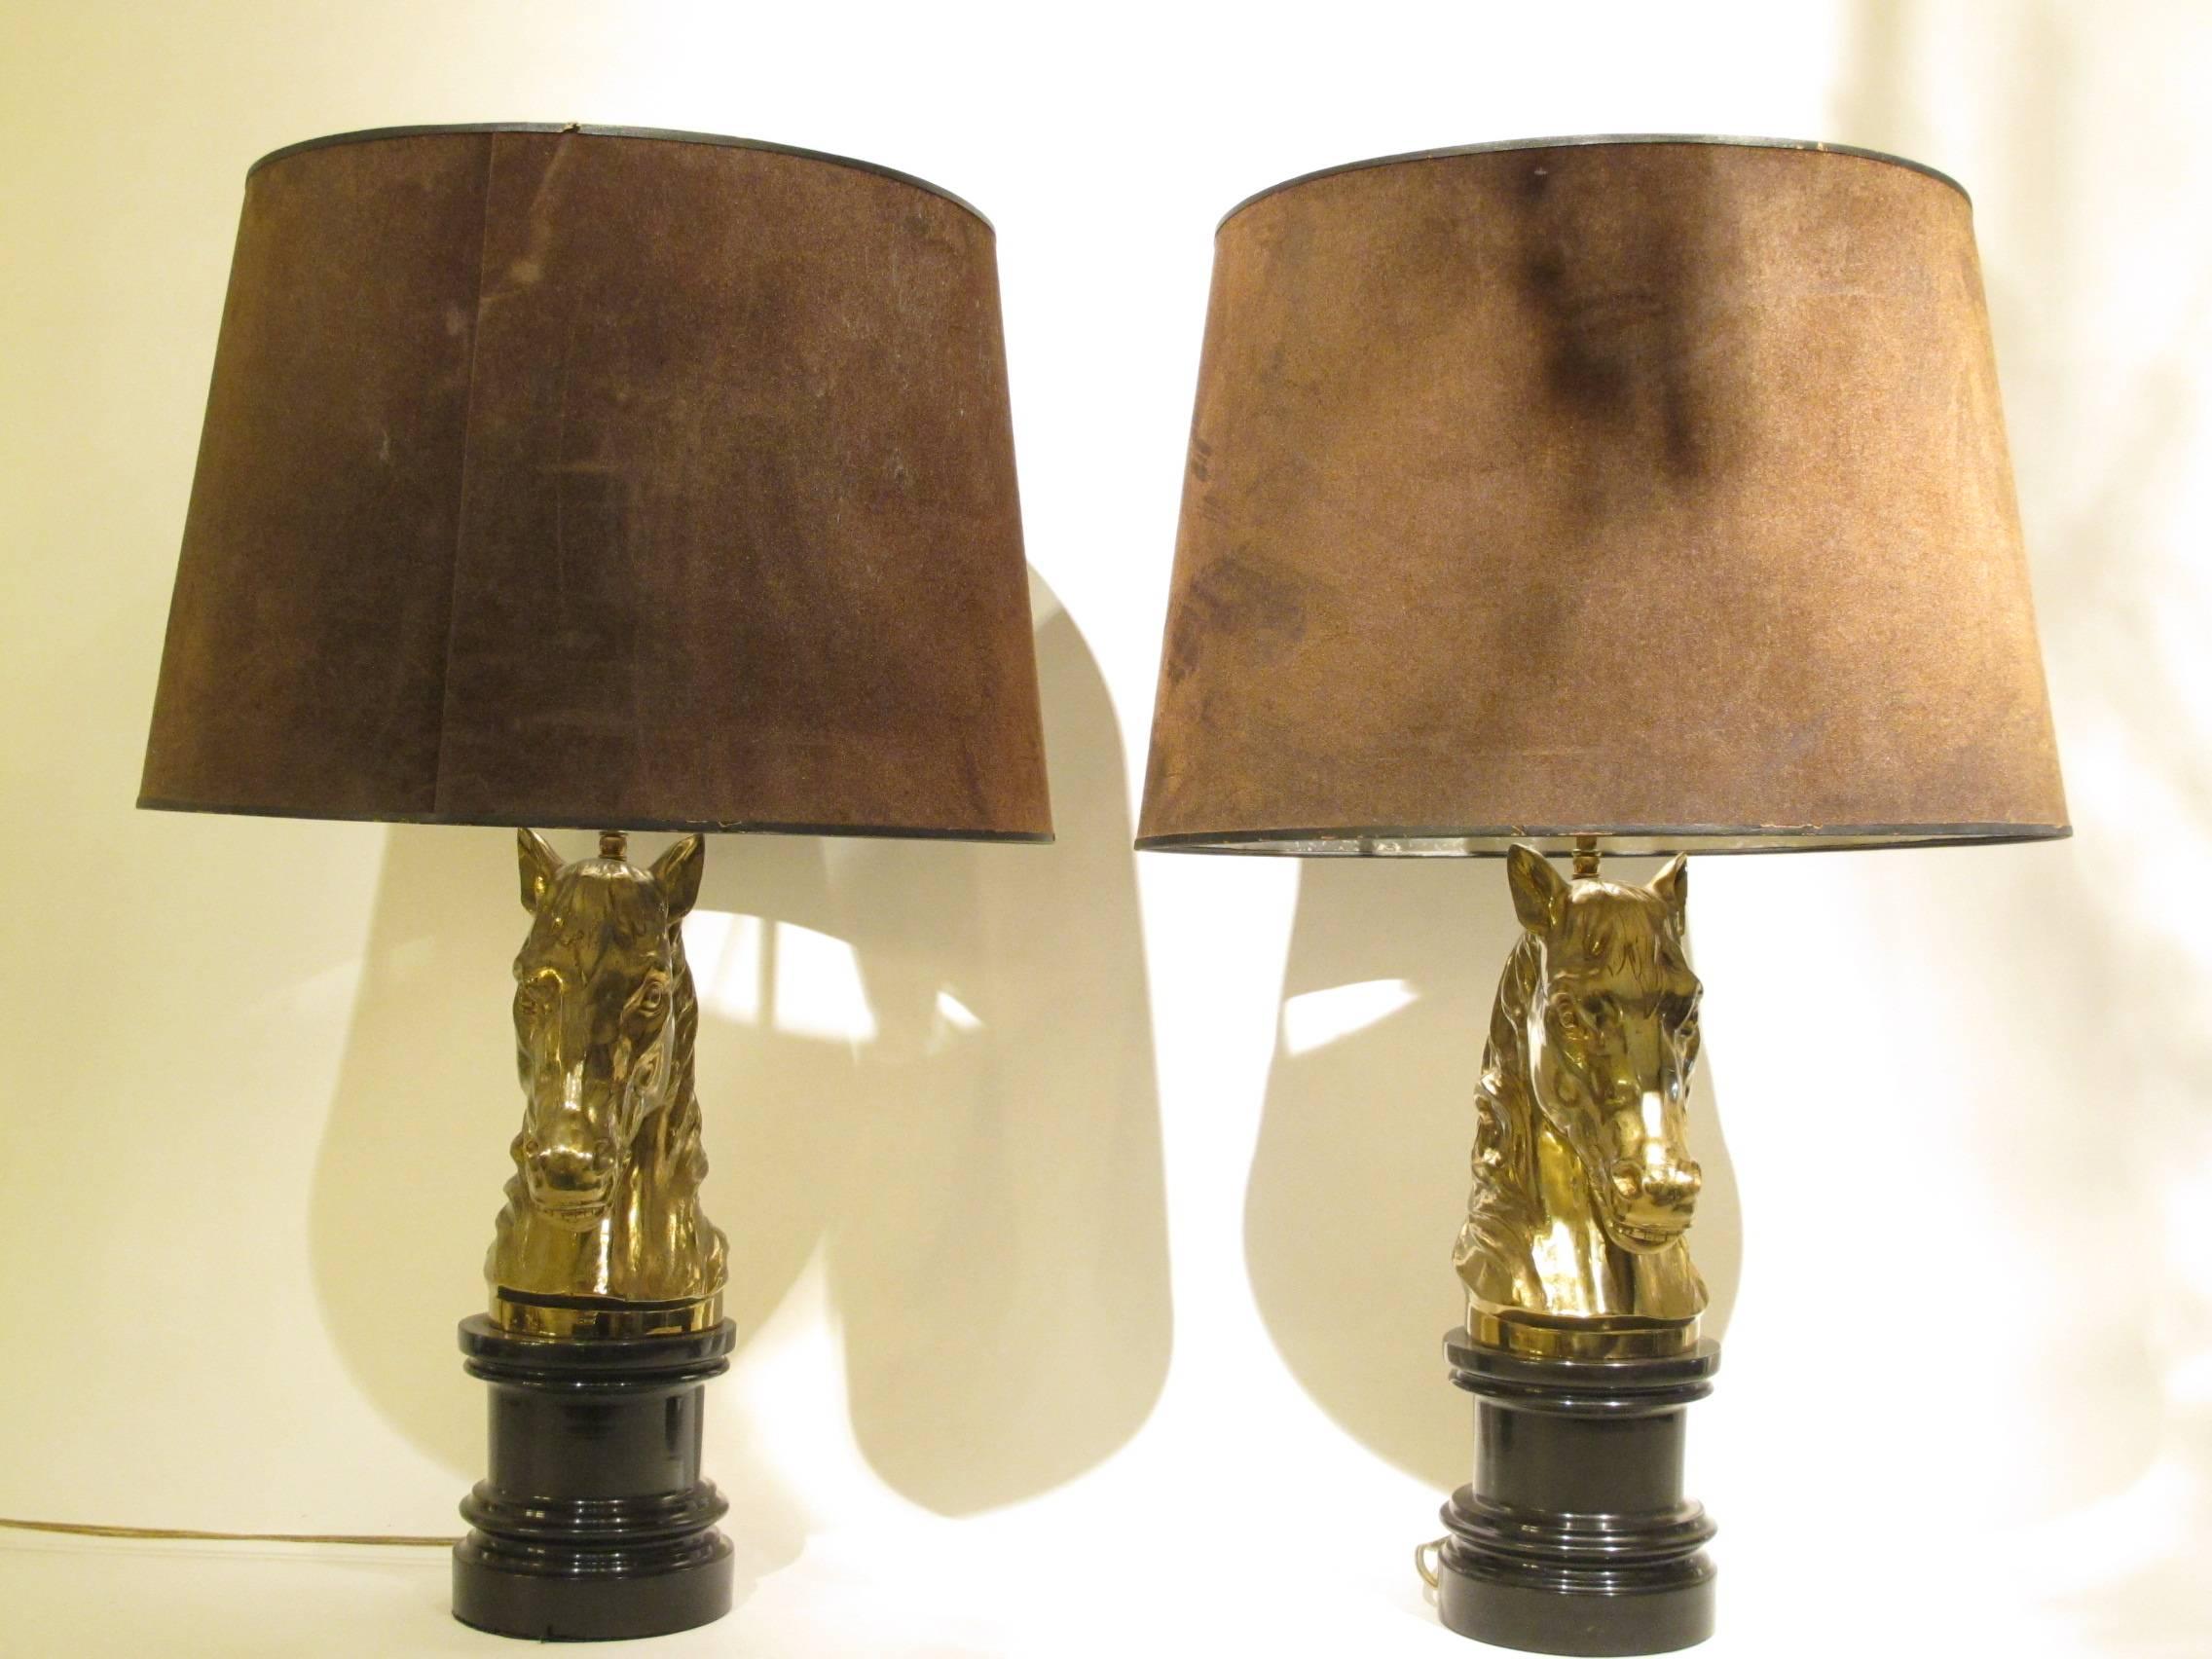 Pair of vintage table lamps by Maison Charles.
Paris, circa 1960

The lampshades are the original ones, but must be replaced!